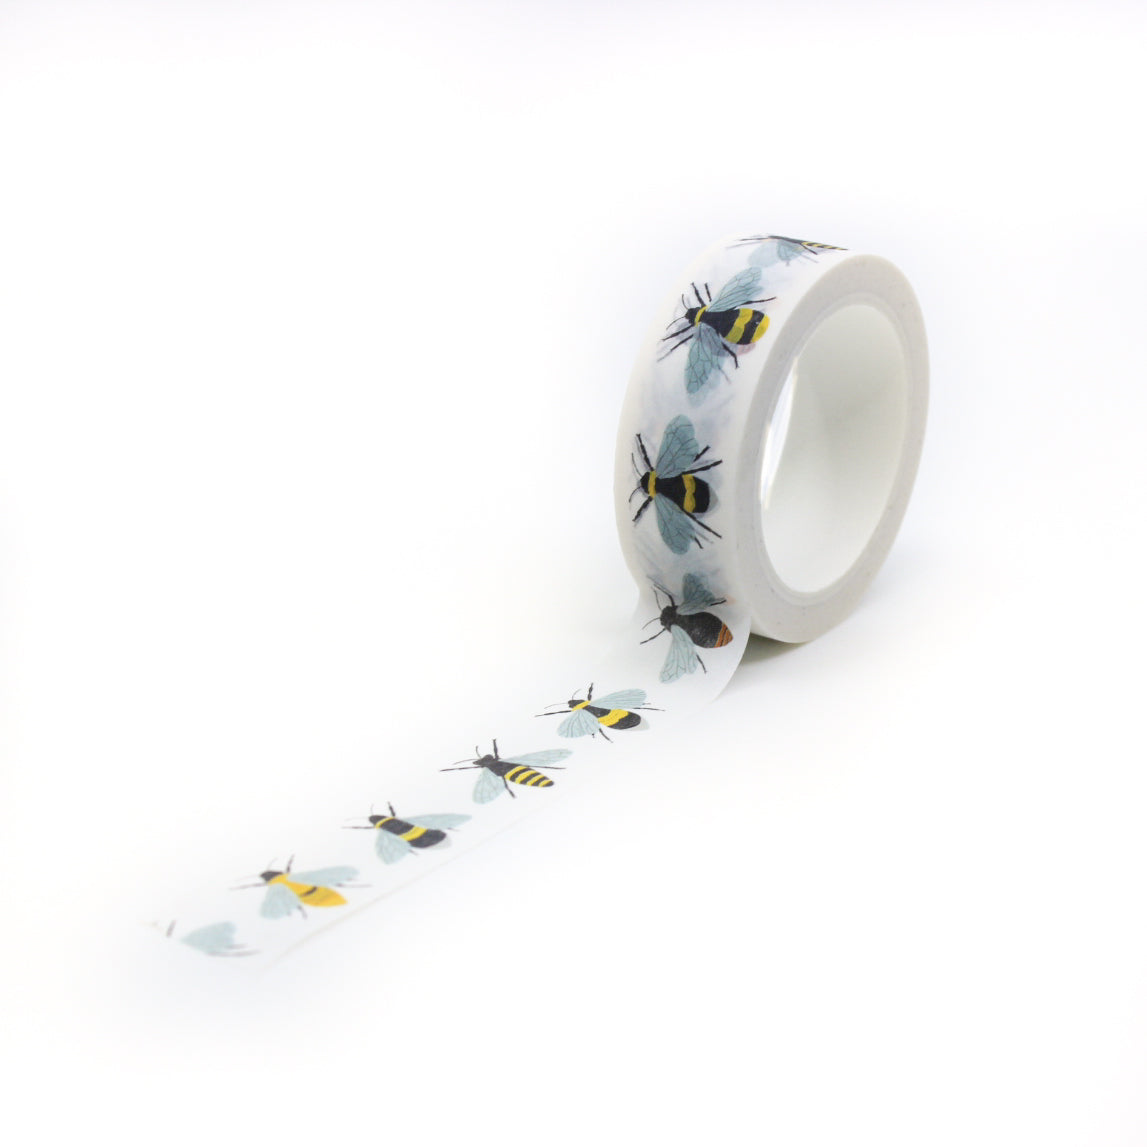 Capture the essence of British wildlife with our British Bumble Bees Washi Tape, adorned with charming illustrations of bumblebees. Ideal for adding a touch of nature and sweetness to your projects. This tape is designed by Sarah Francis and sold at BBB Supplies Craft Shop.